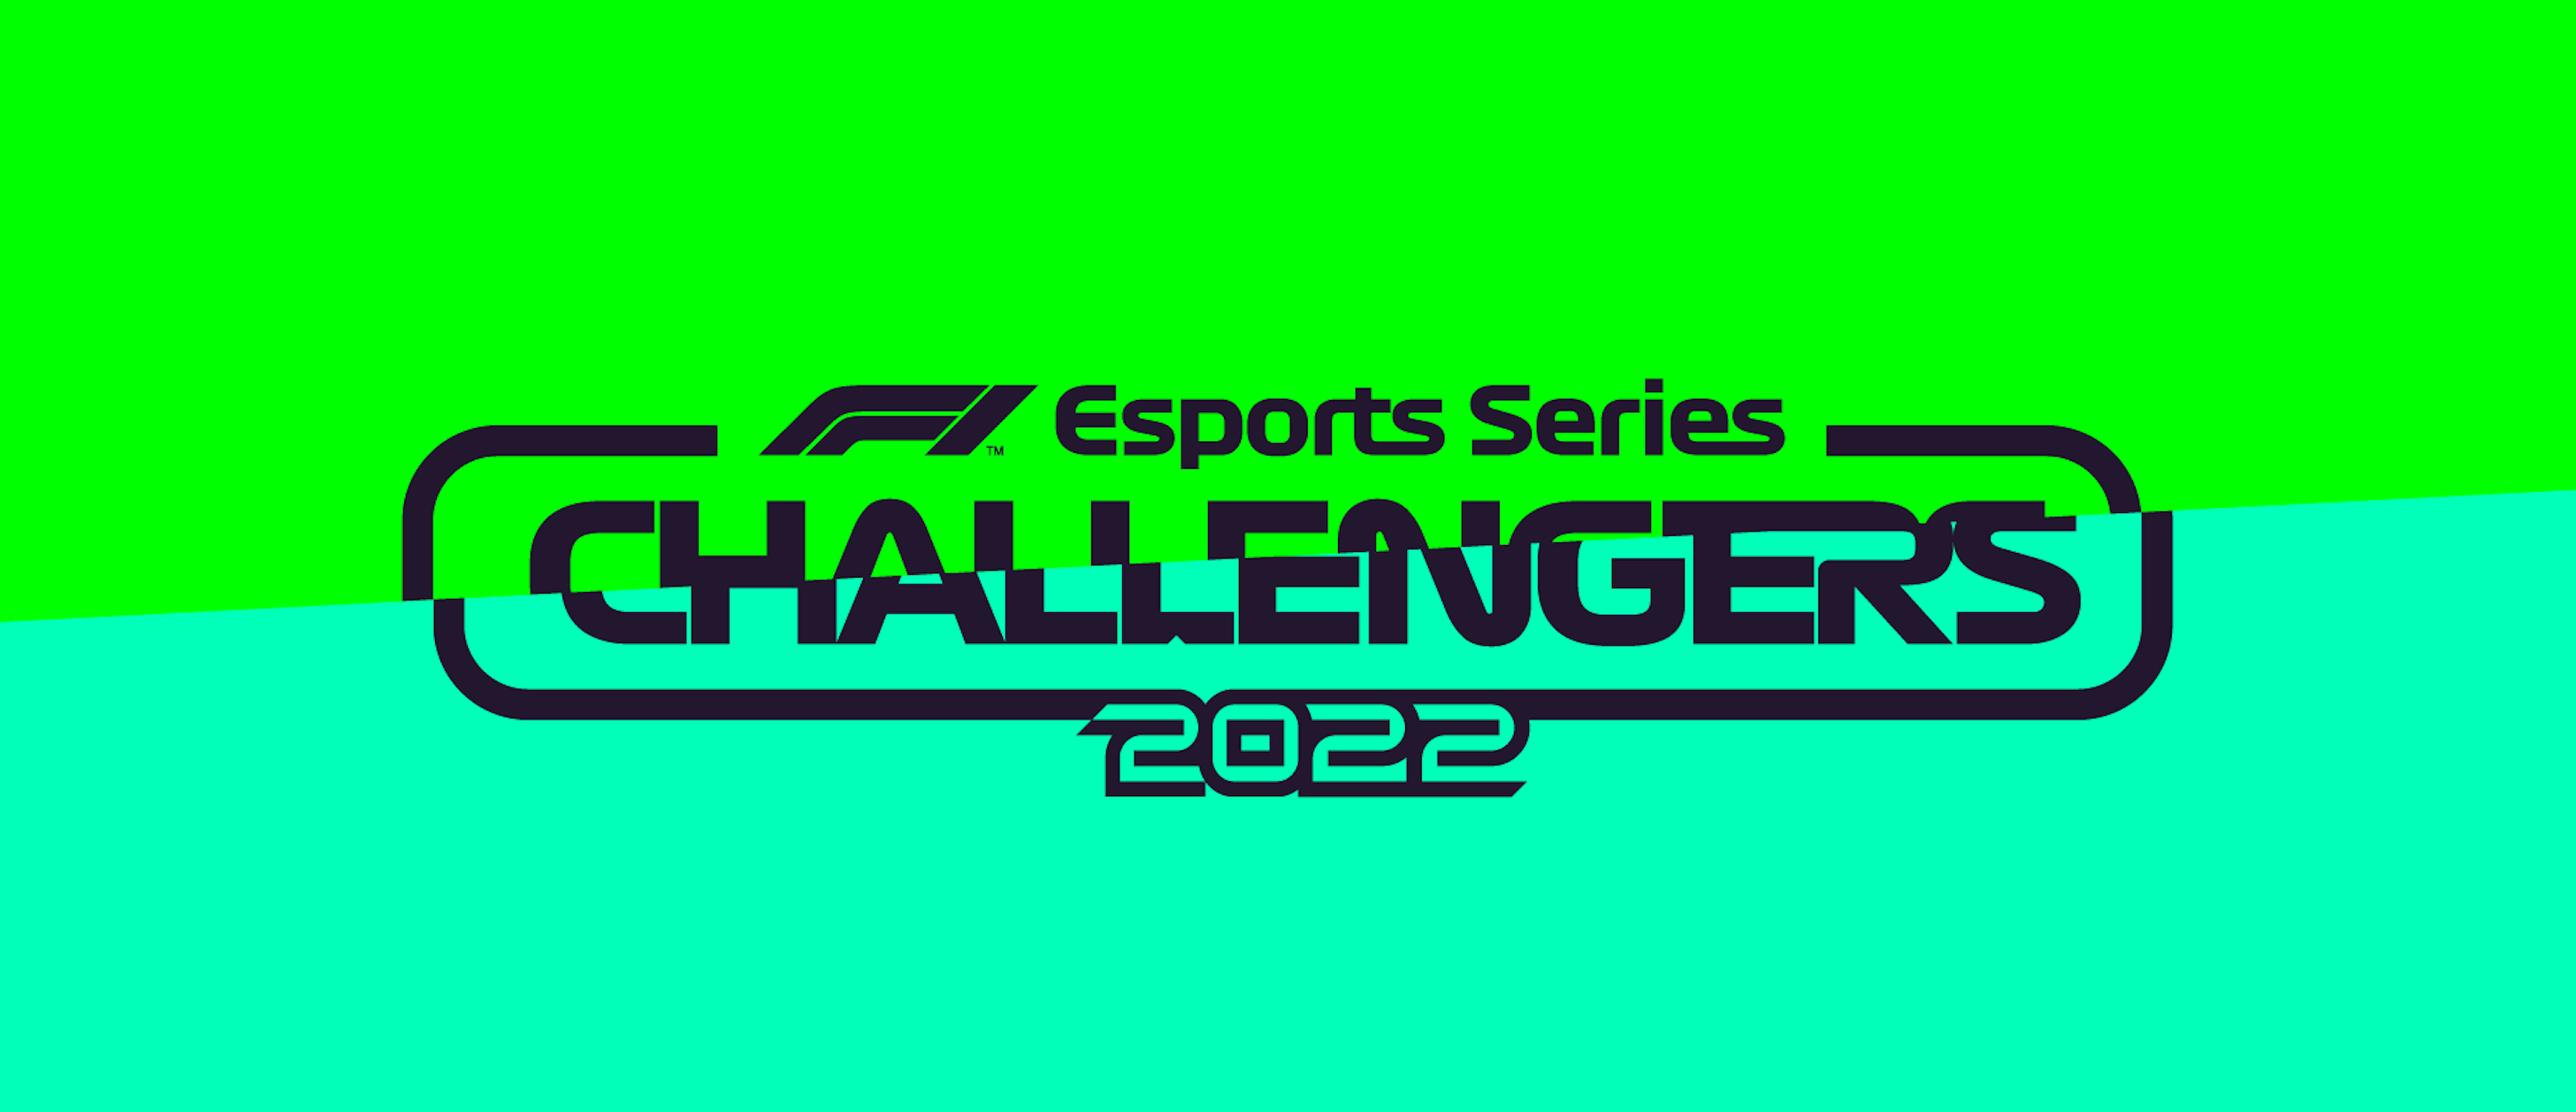 F1 Esports Series Challengers is Back for 2022!